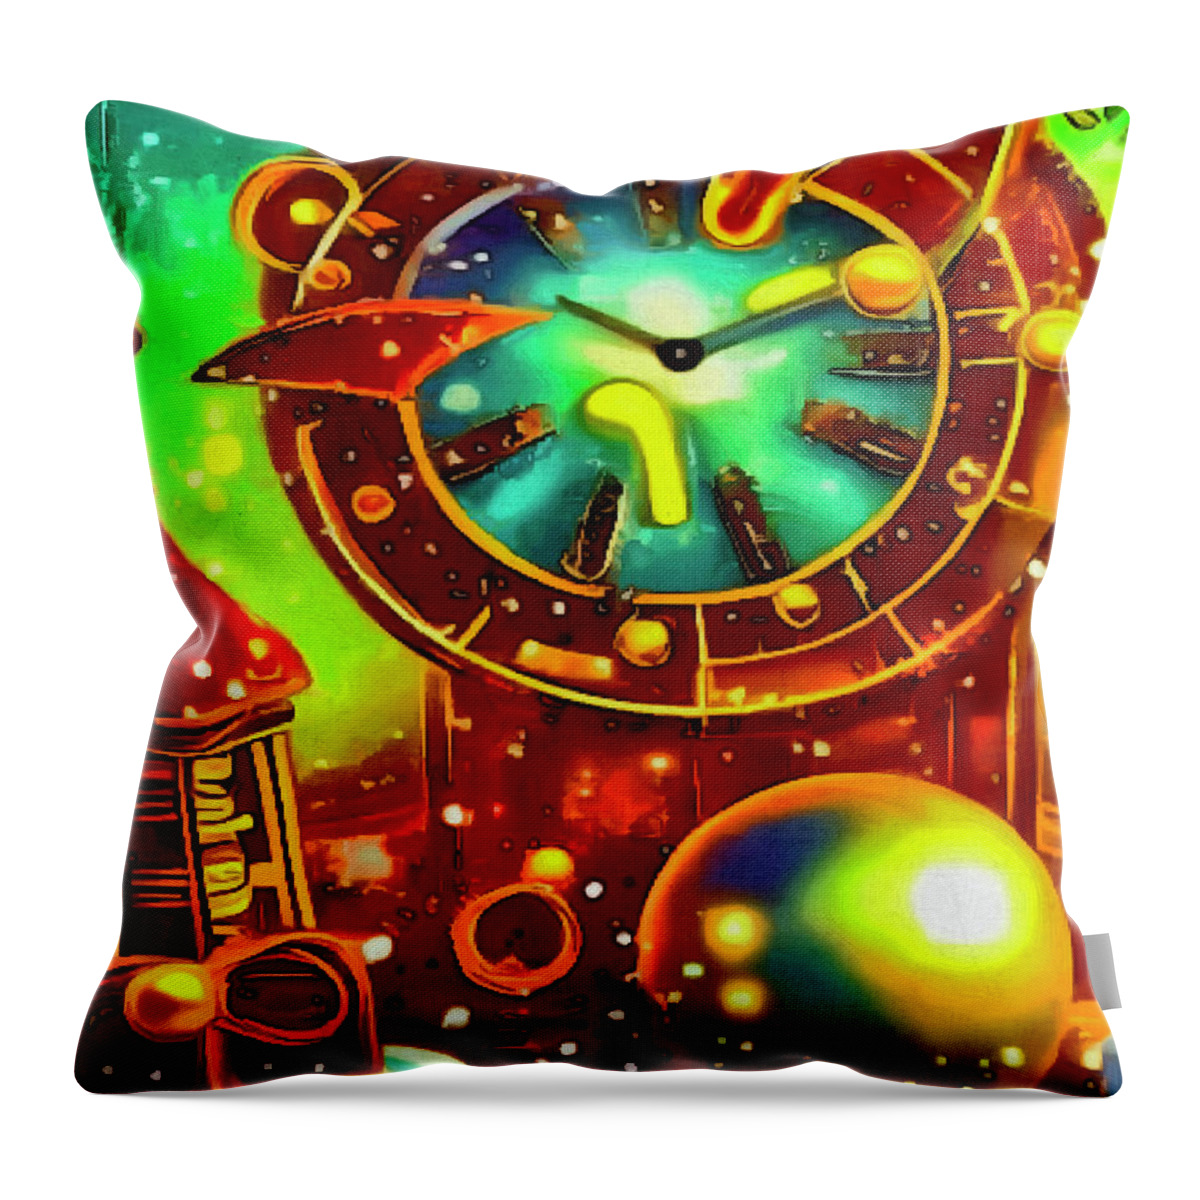  Throw Pillow featuring the digital art Astrological Time Pieces 3 by Michelle Hoffmann